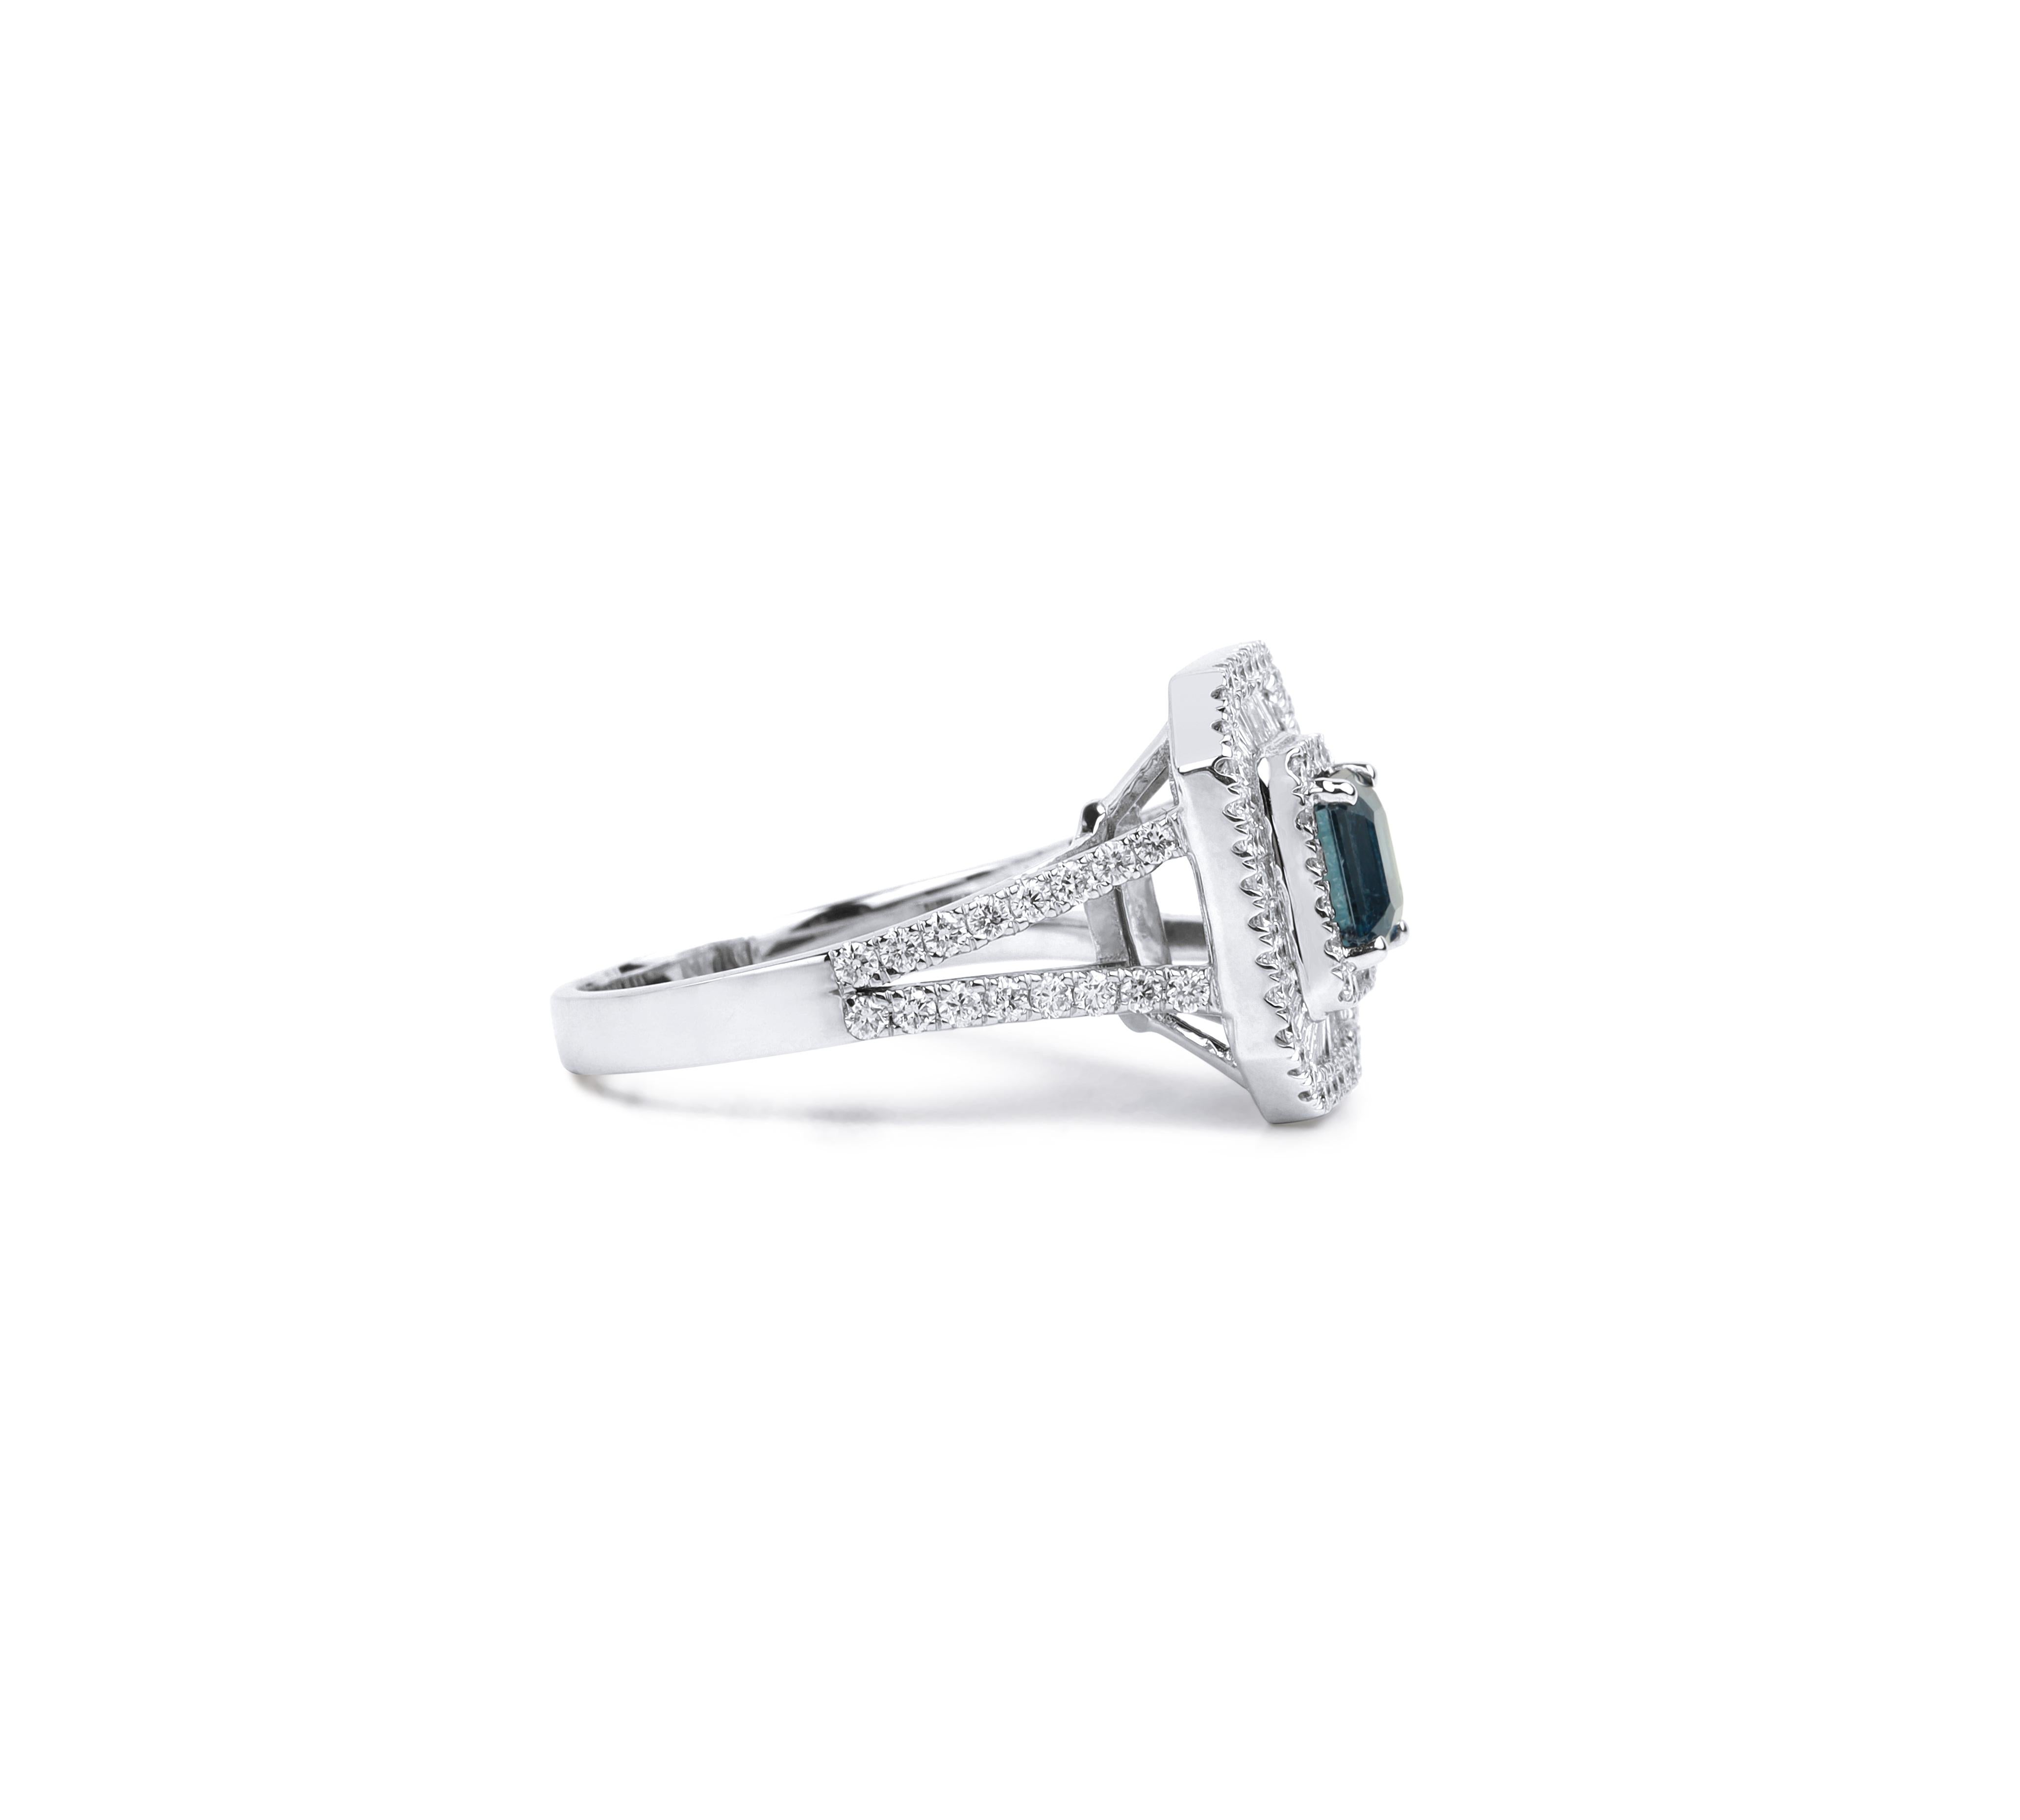 Emerald Cut Natural Sapphire Diamond Triple Halo Cocktail Engagement Ring in 18k White Gold For Sale